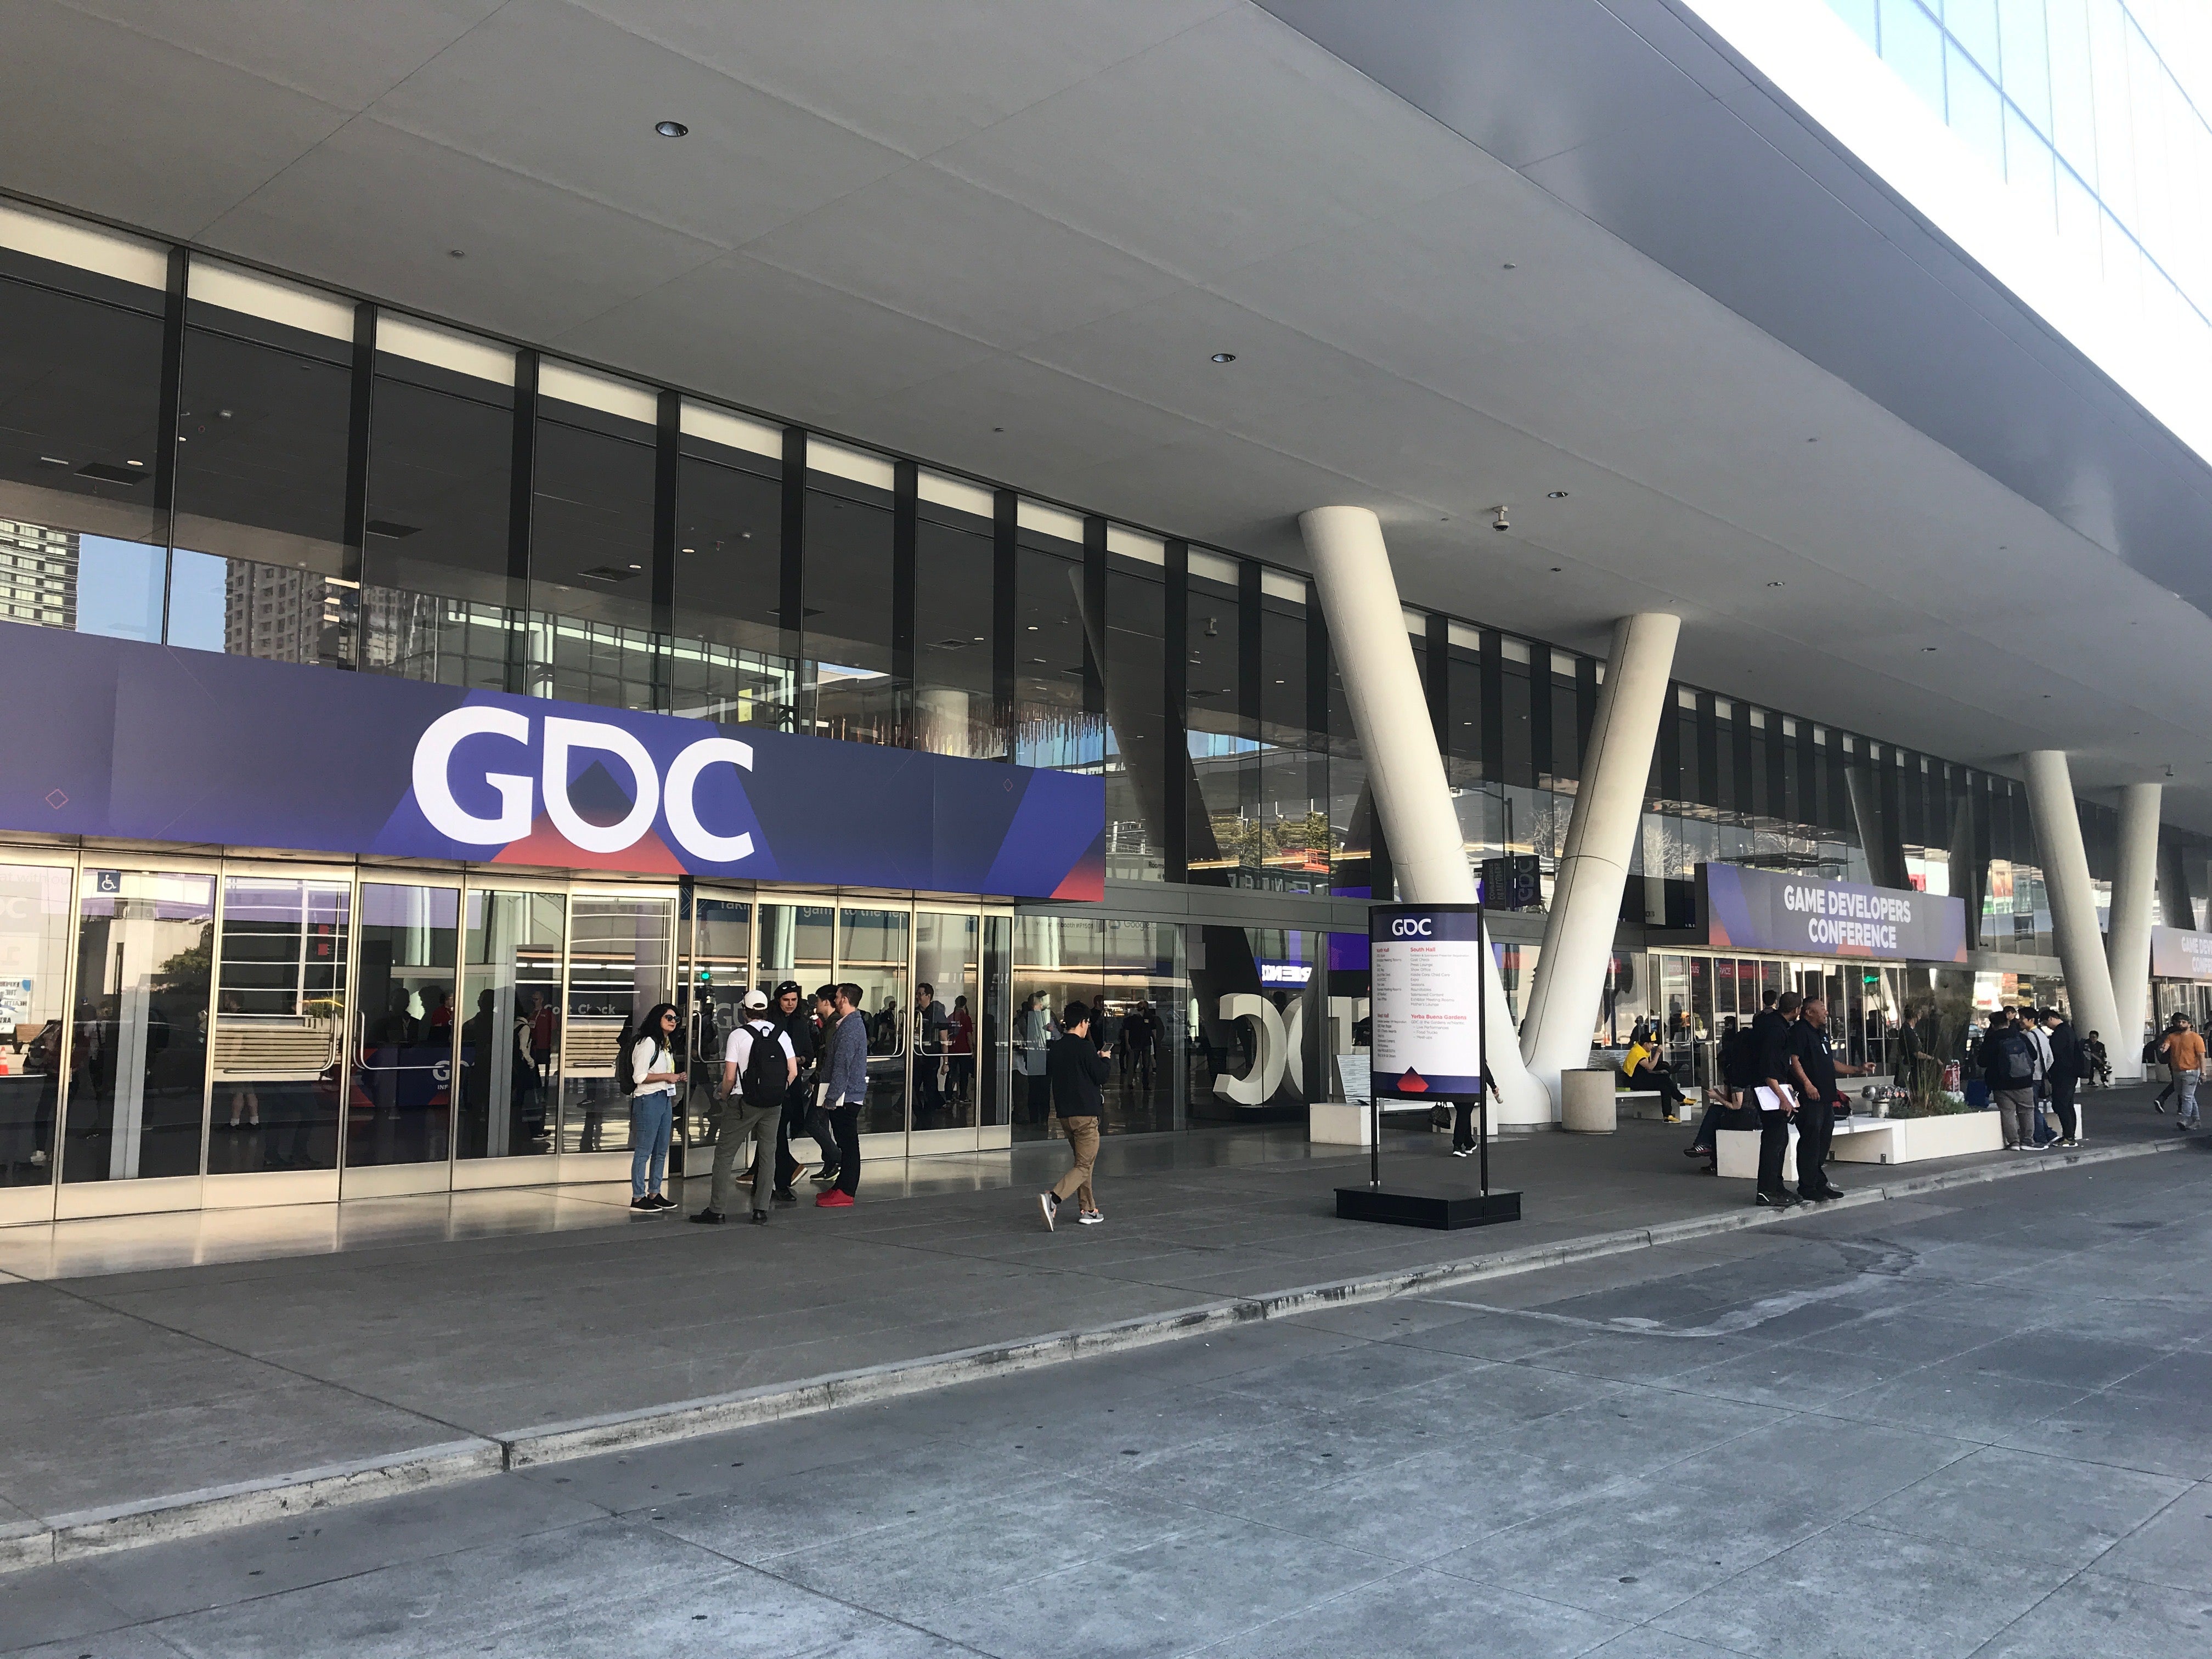 Image for Amazon, Blizzard withdraw from GDC